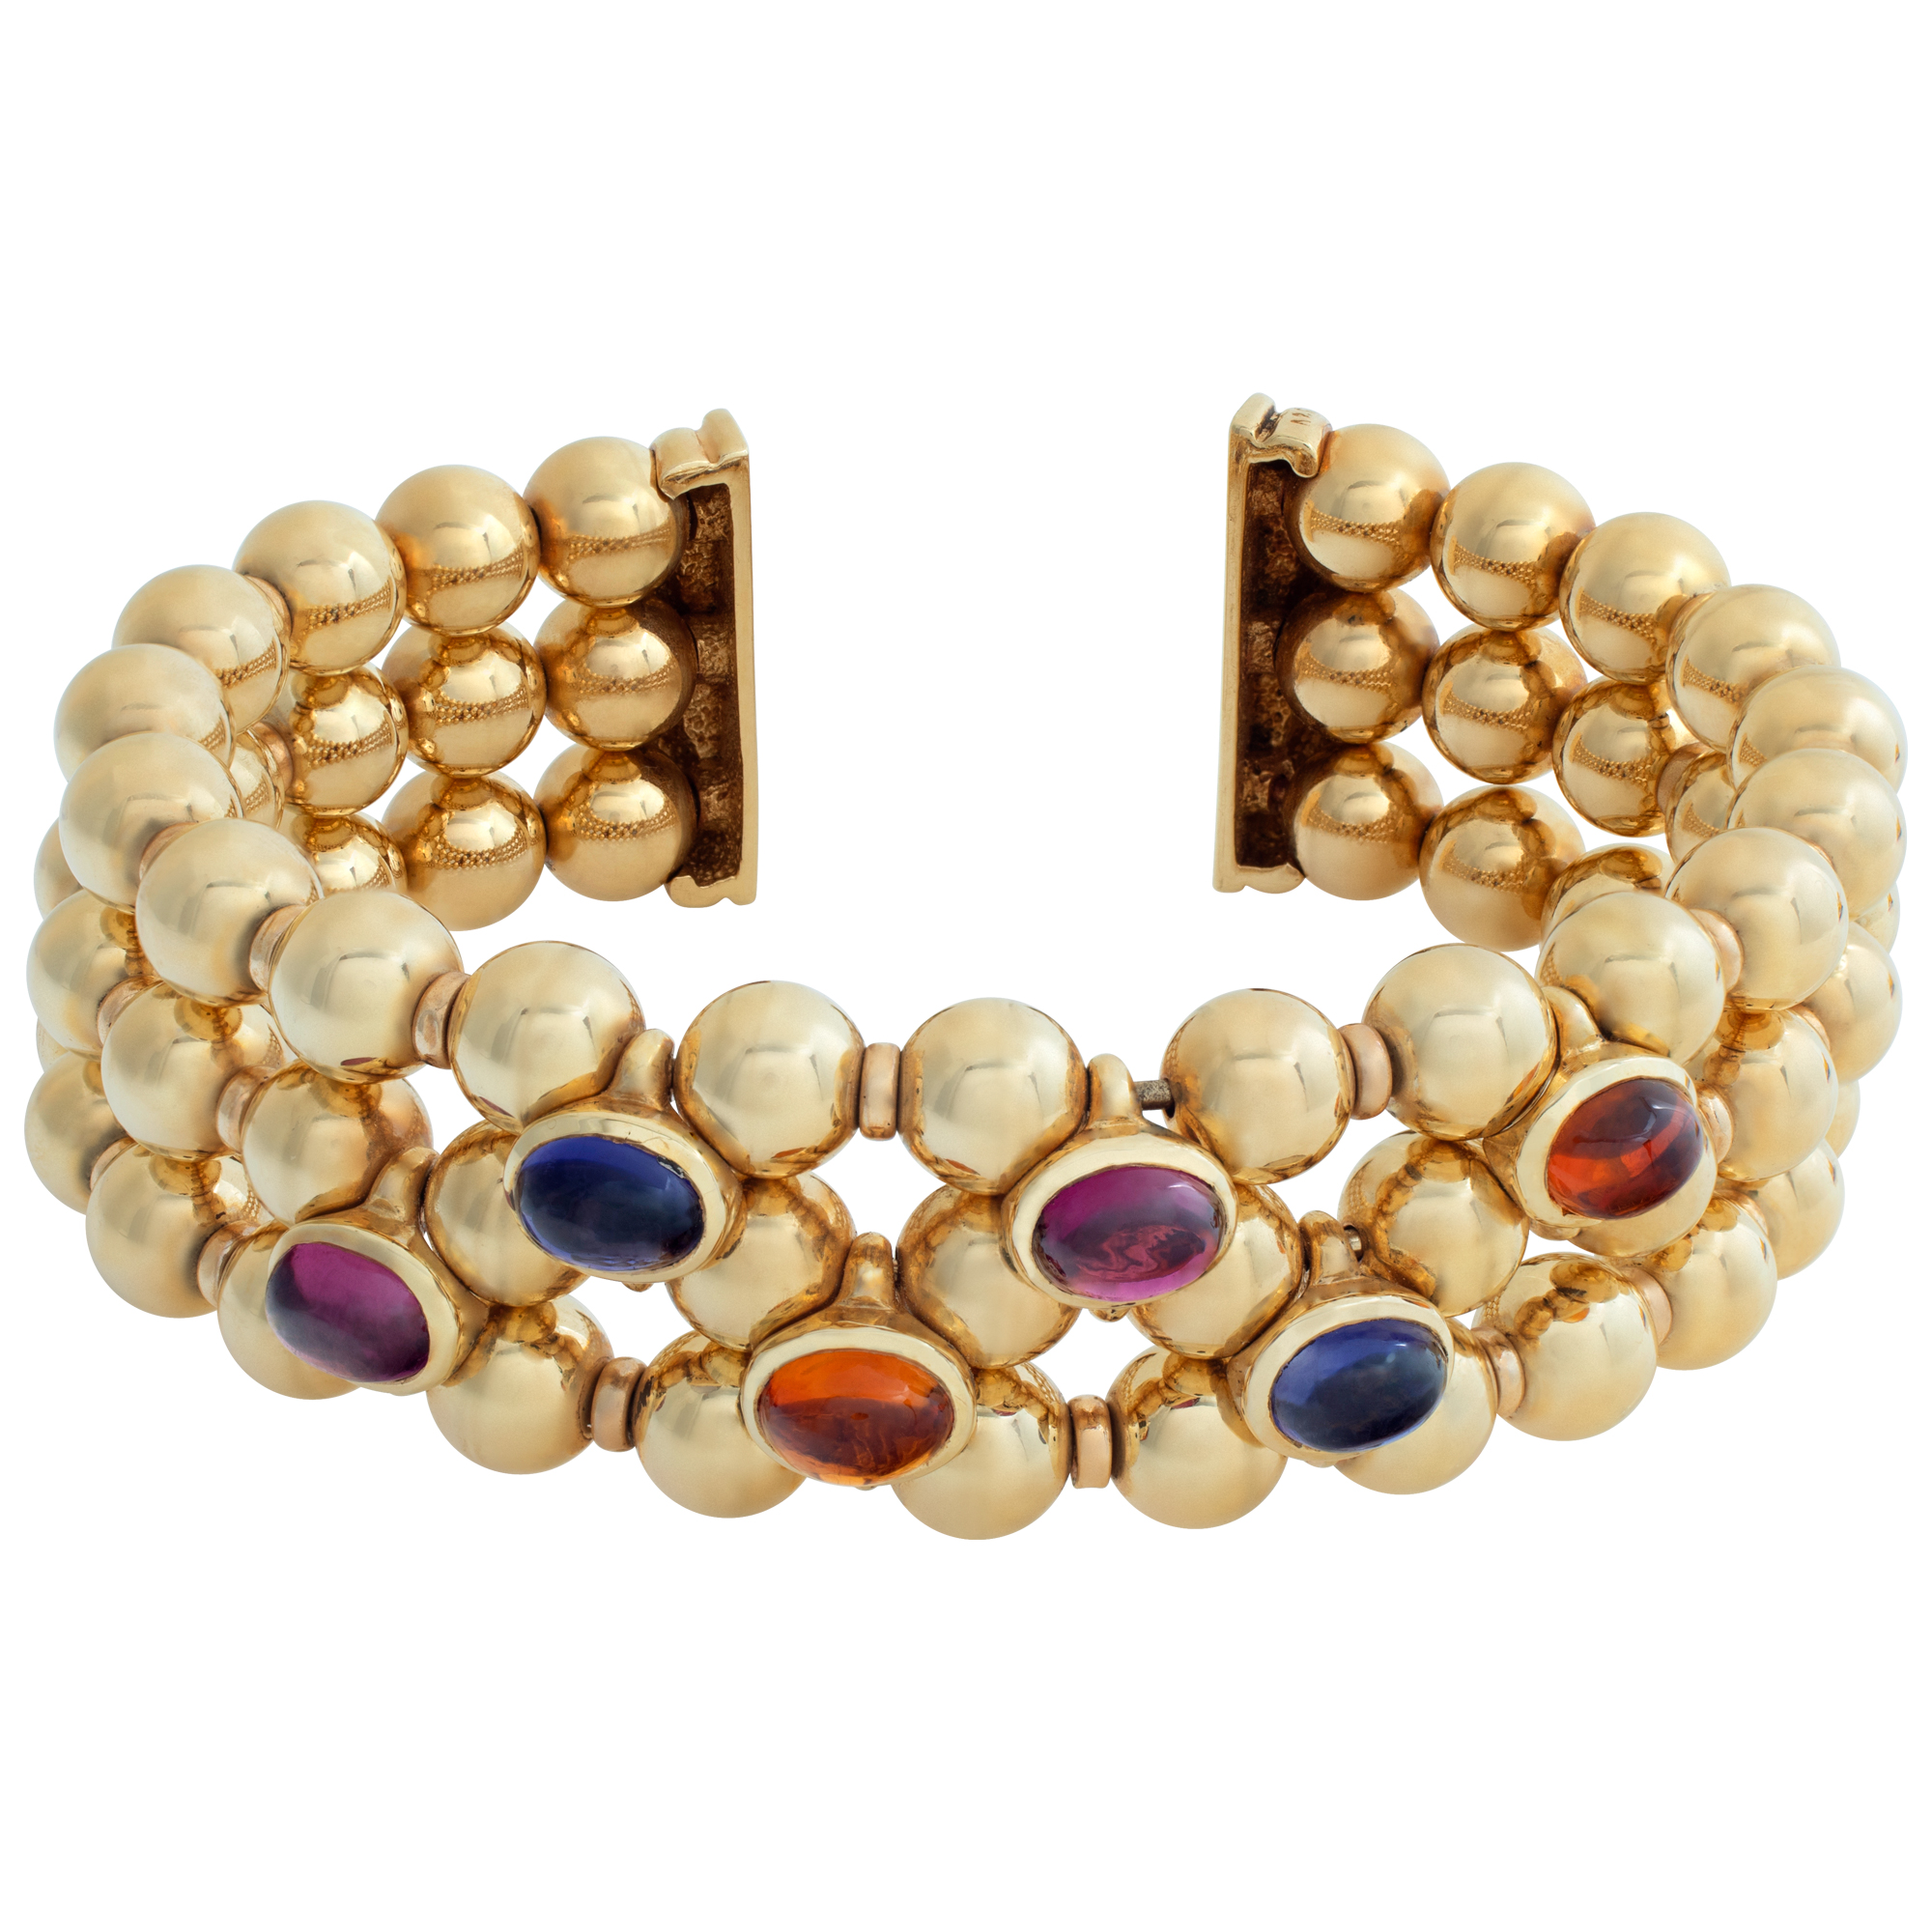 Gold bead flexible cuff with colored cabochon stones in 14k yellow gold image 1